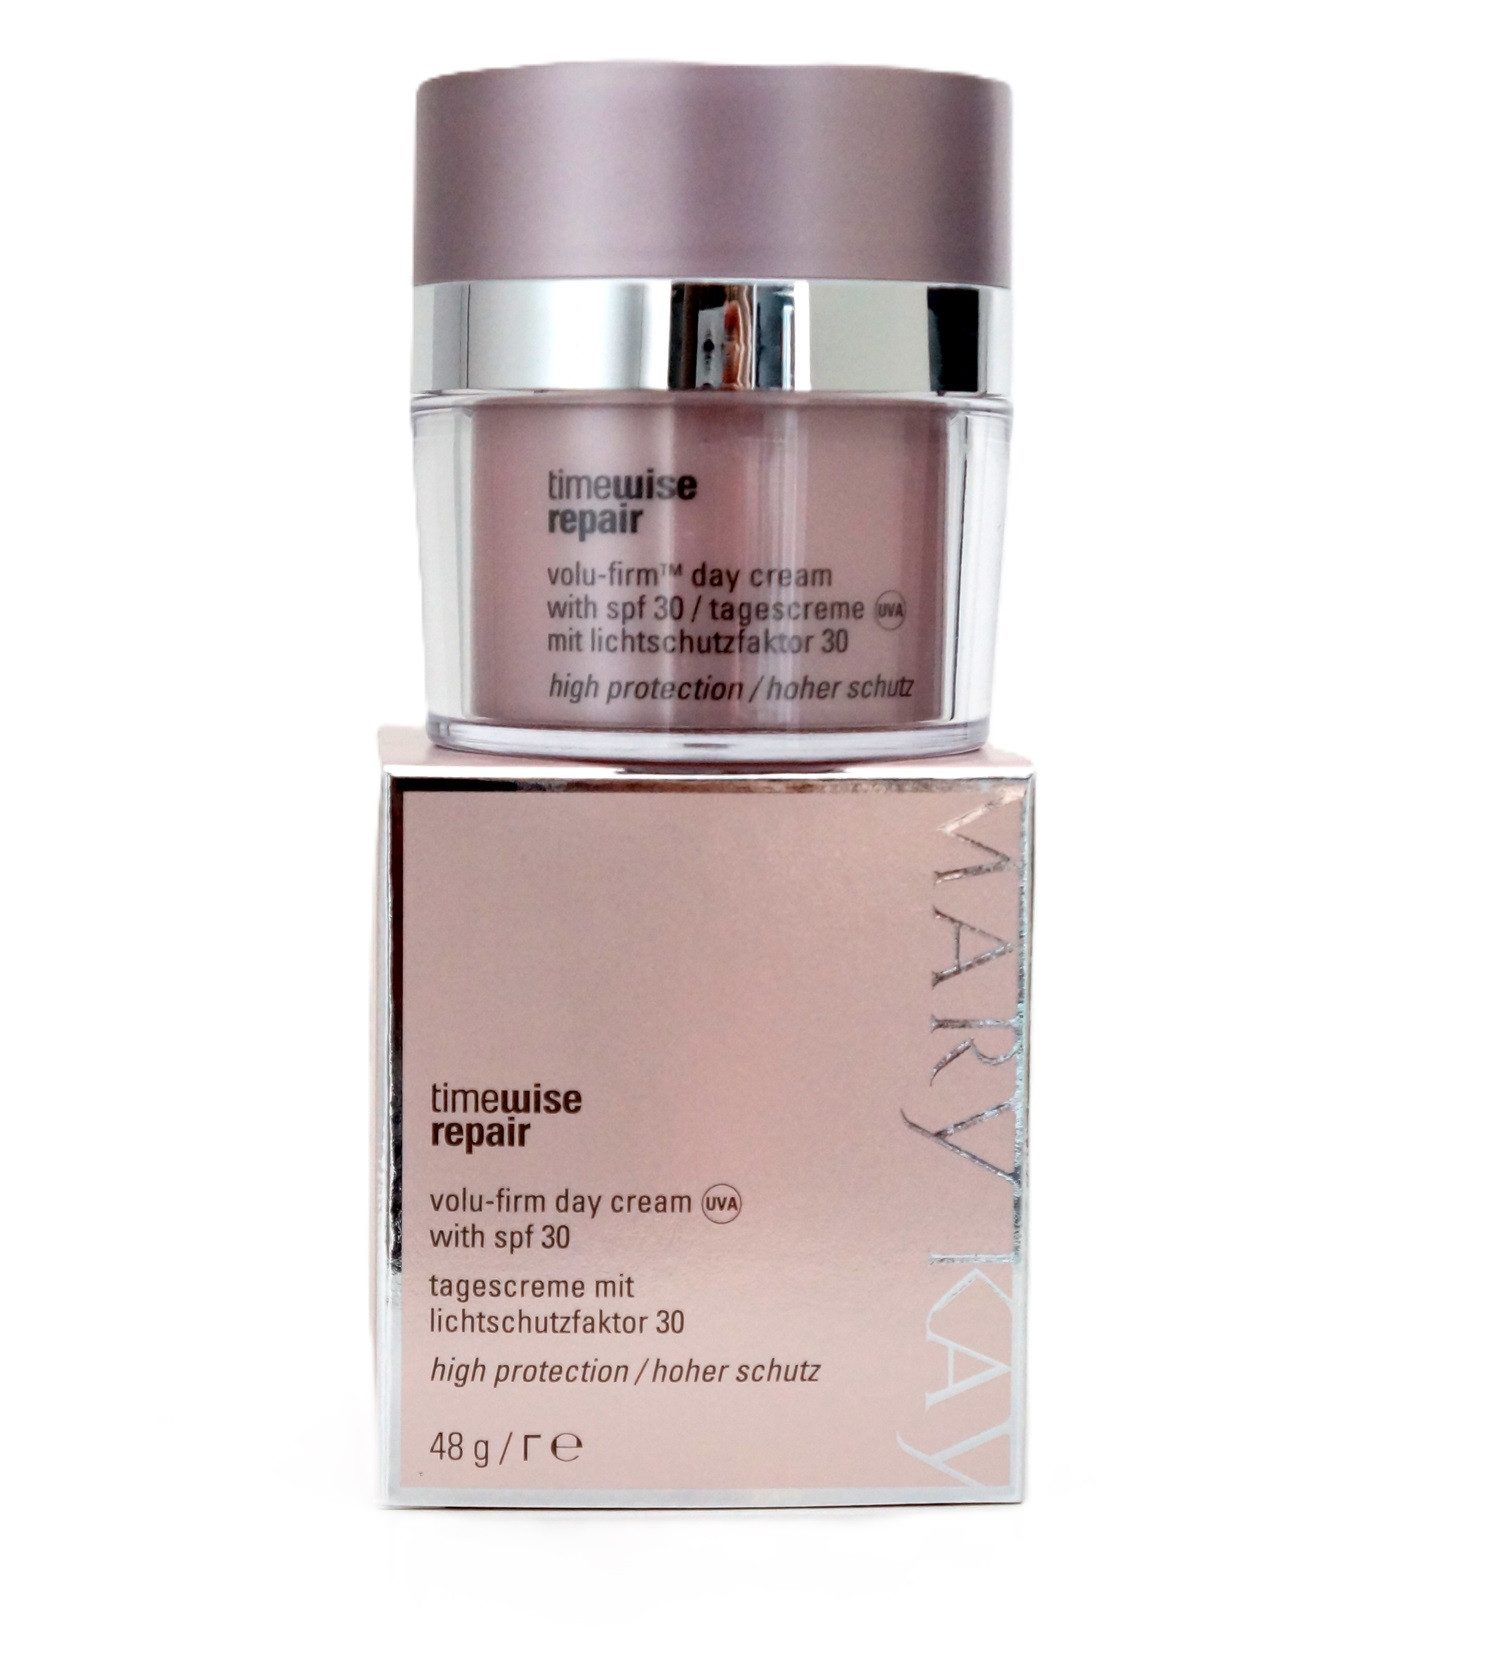 Mary Kay Tagescreme TimeWise Repair Volu-Firm Day Cream Tagescreme mit LSF 30